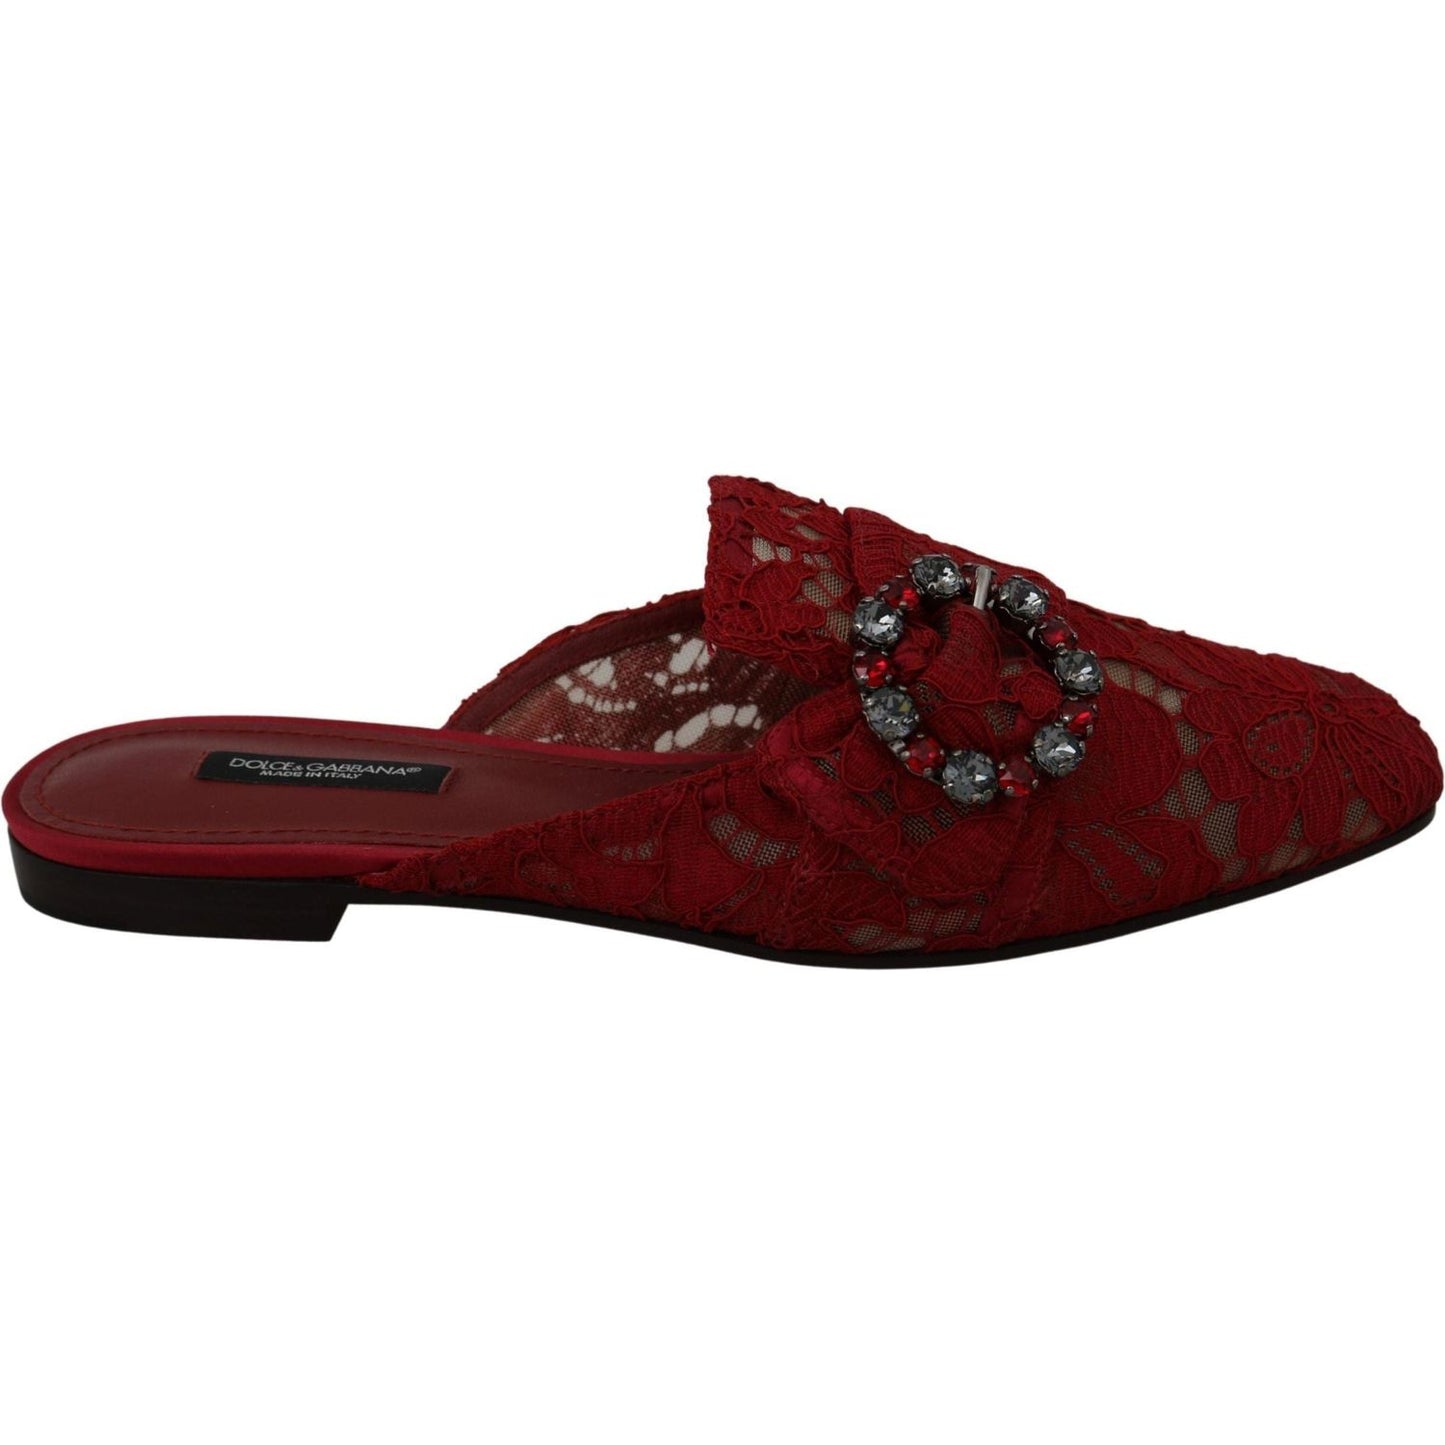 Dolce & Gabbana Radiant Red Slide Flats with Crystal Embellishments red-lace-crystal-slide-on-flats-shoes IMG_0266-scaled-2efcc1ed-cc8.jpg